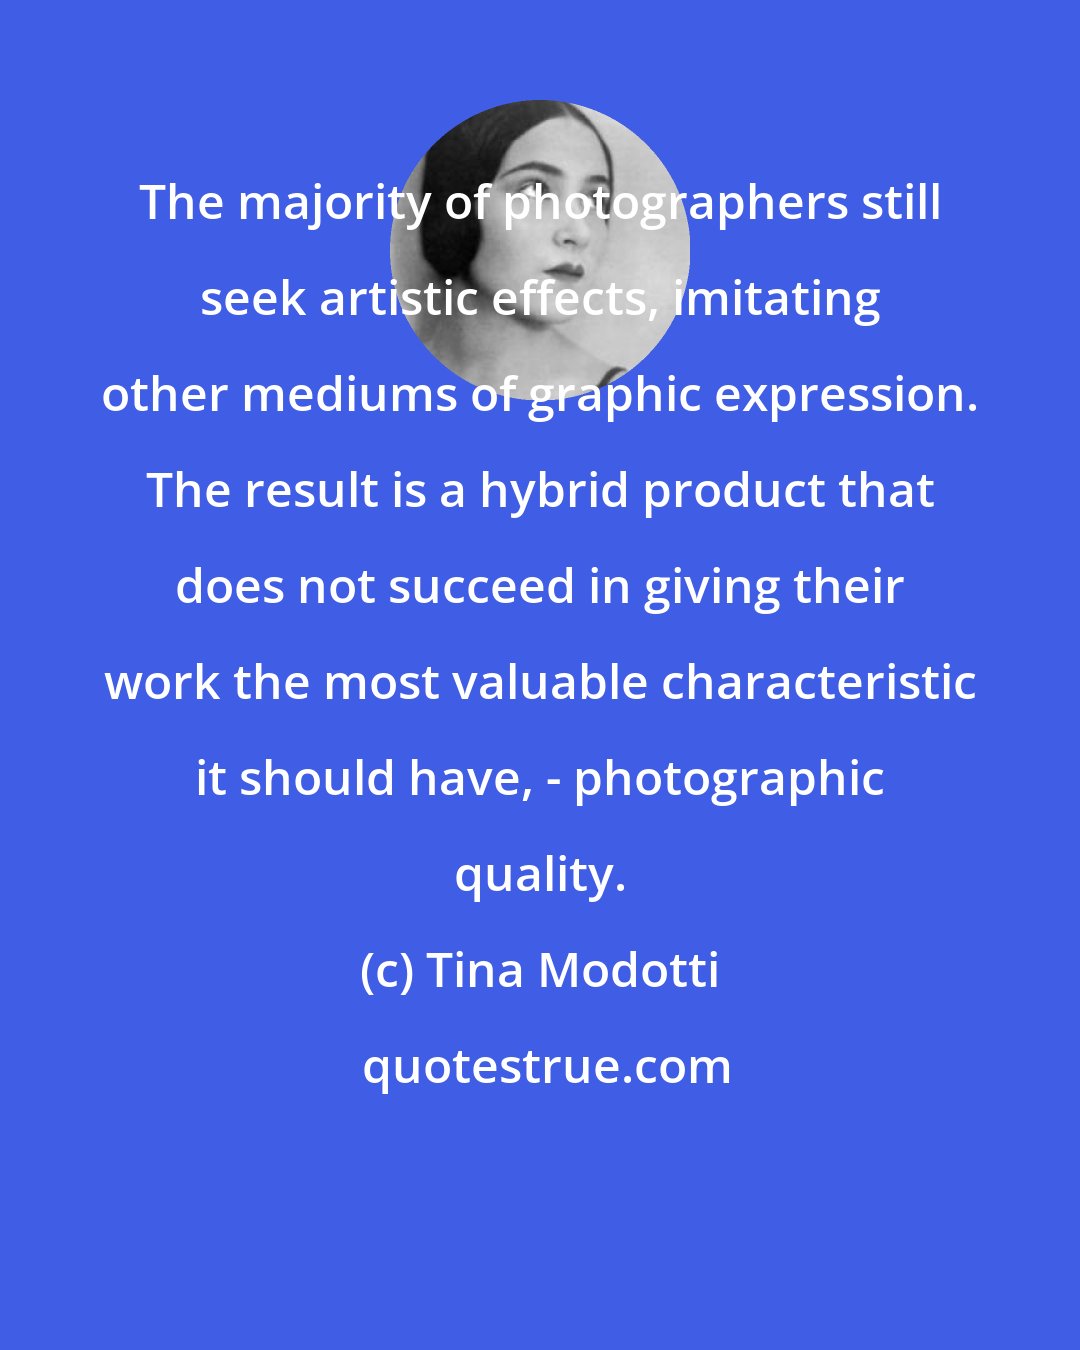 Tina Modotti: The majority of photographers still seek artistic effects, imitating other mediums of graphic expression. The result is a hybrid product that does not succeed in giving their work the most valuable characteristic it should have, - photographic quality.